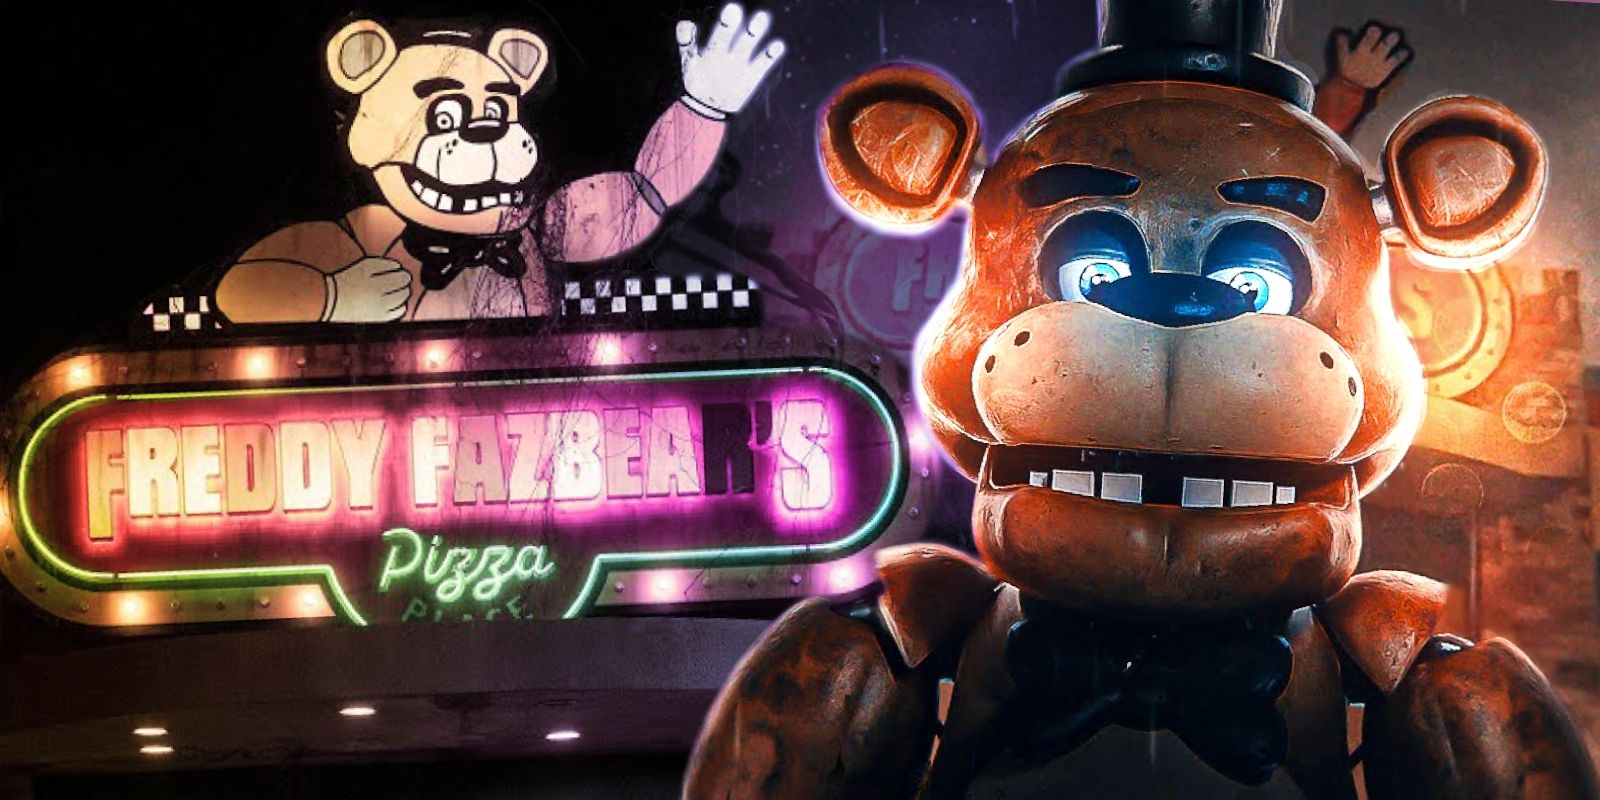 FNAF Movie Trailer: Plot Details, Character Changes, Theories